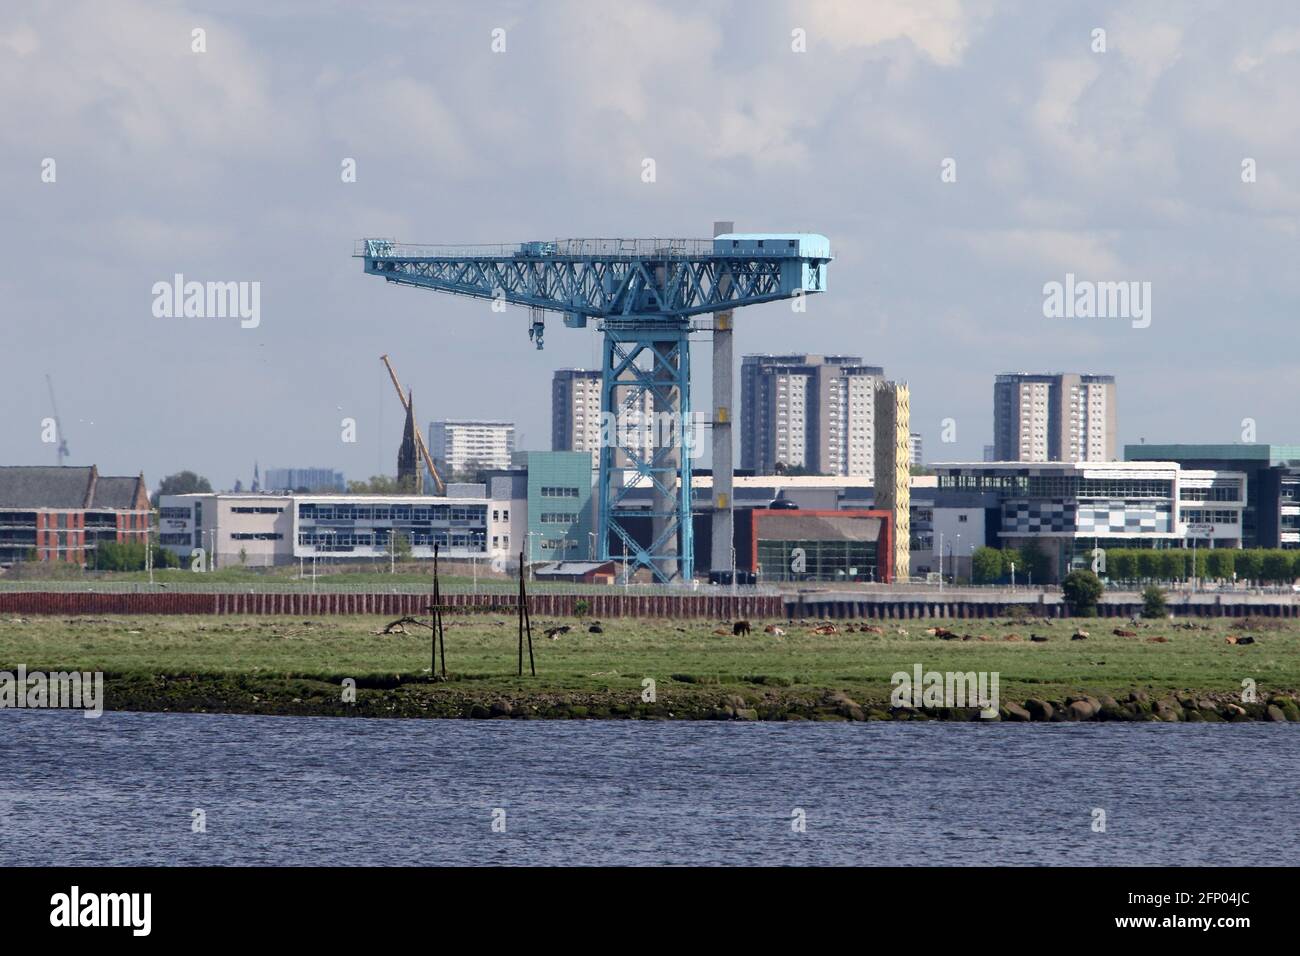 Titan Clydebank, commonly known as the Titan Crane is a 150-foot-high cantilever crane at Clydebank, West Dunbartonshire, Scotland seen from Erskine Stock Photo